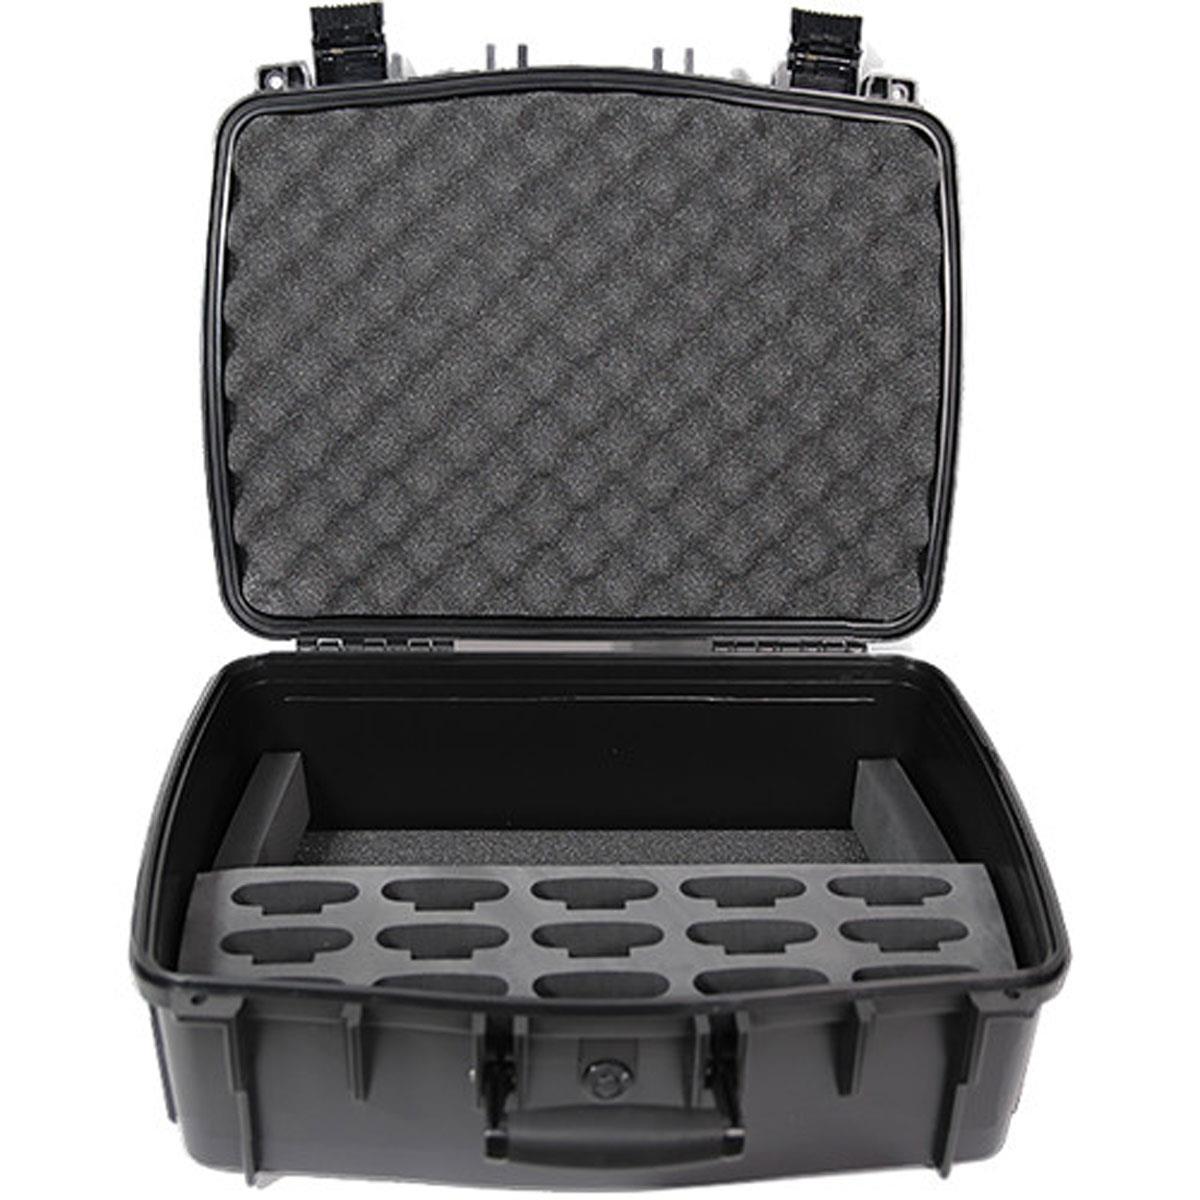 Image of Williams Sound Water Resistant Carry Case with 15 Slot Foam Insert